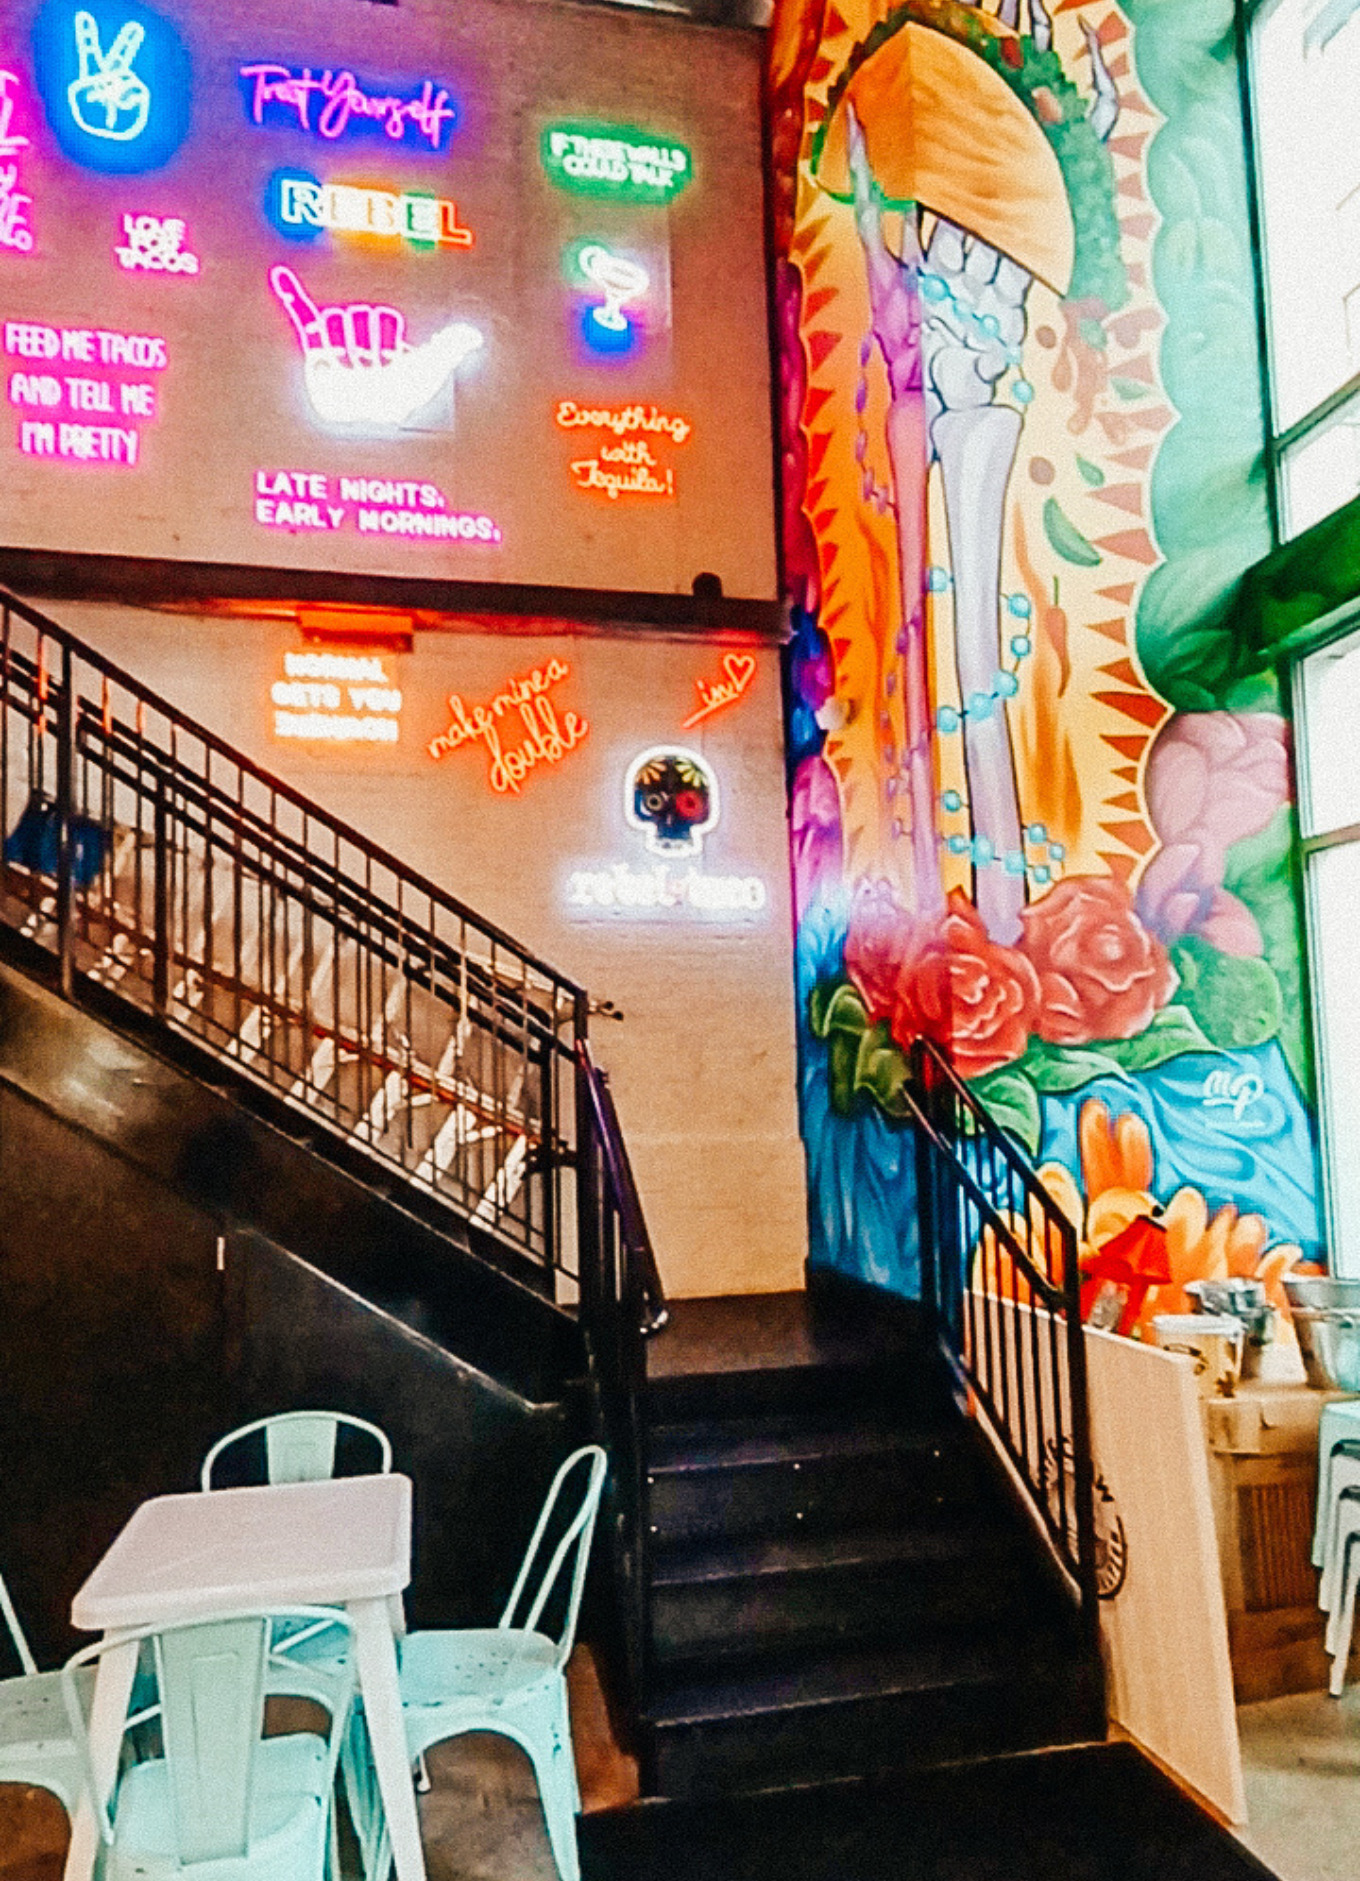 The colourful interior of Rebel Taco restaurant in Washington, DC. Neon signs adorn the wall all the way to the high ceilings.